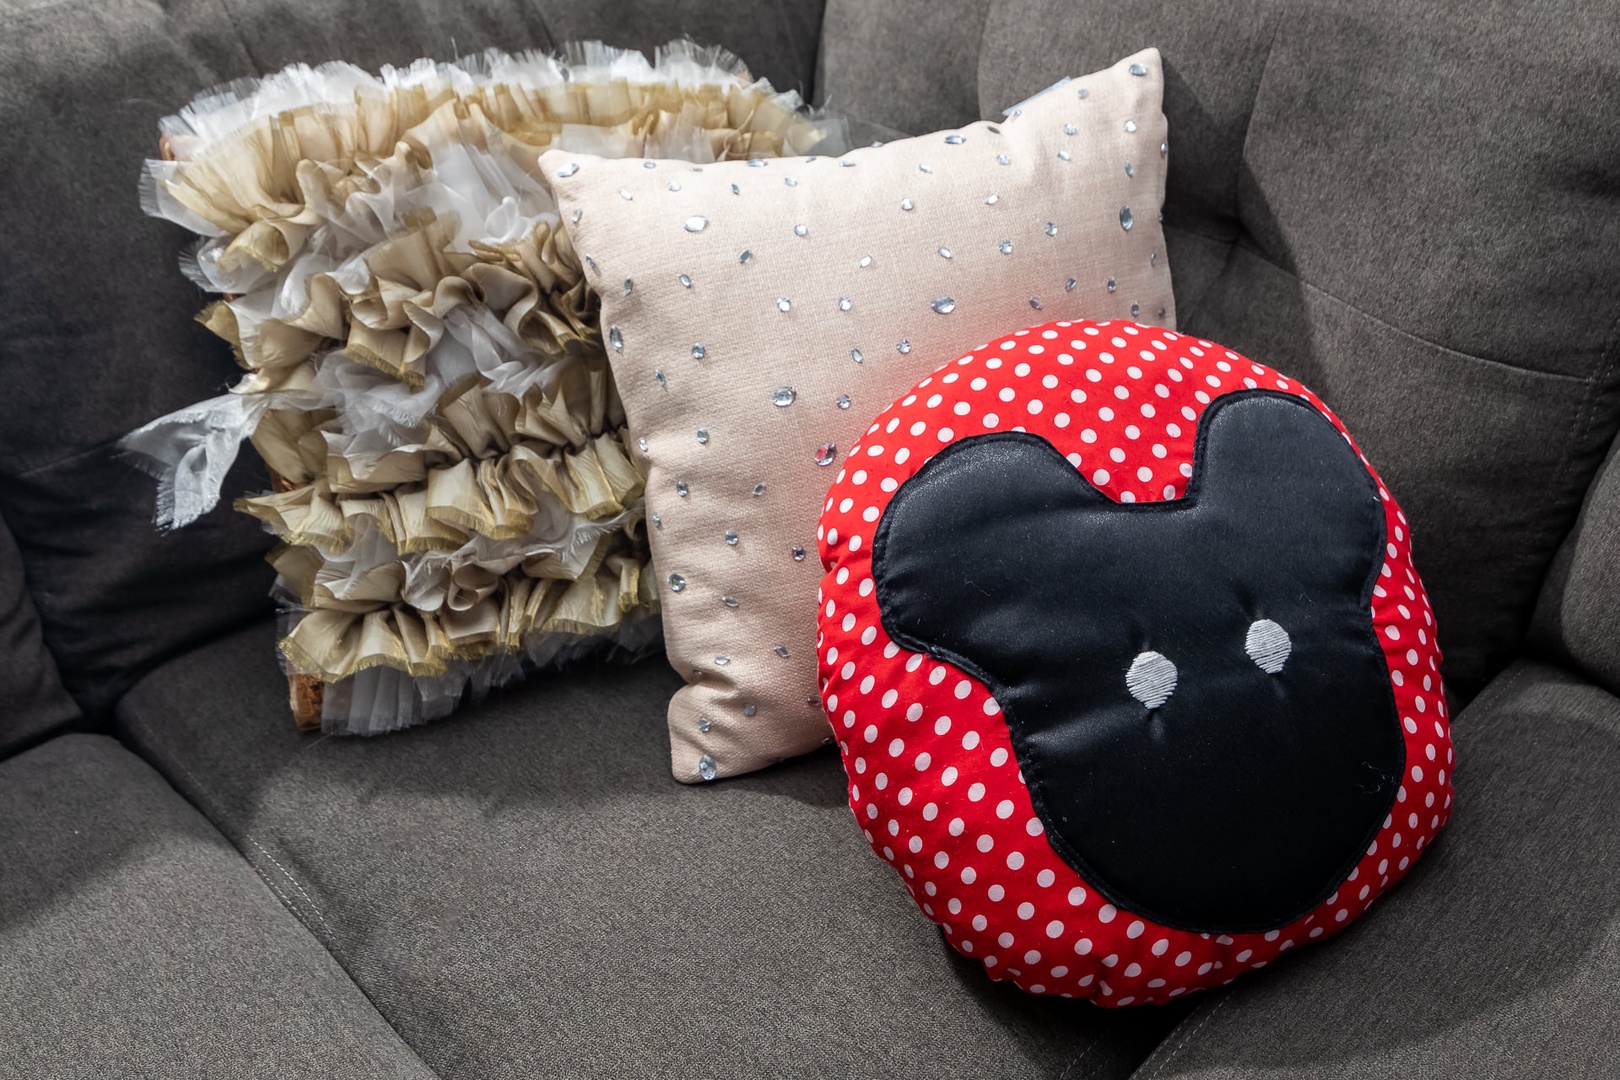 Cushion pillows in the living area